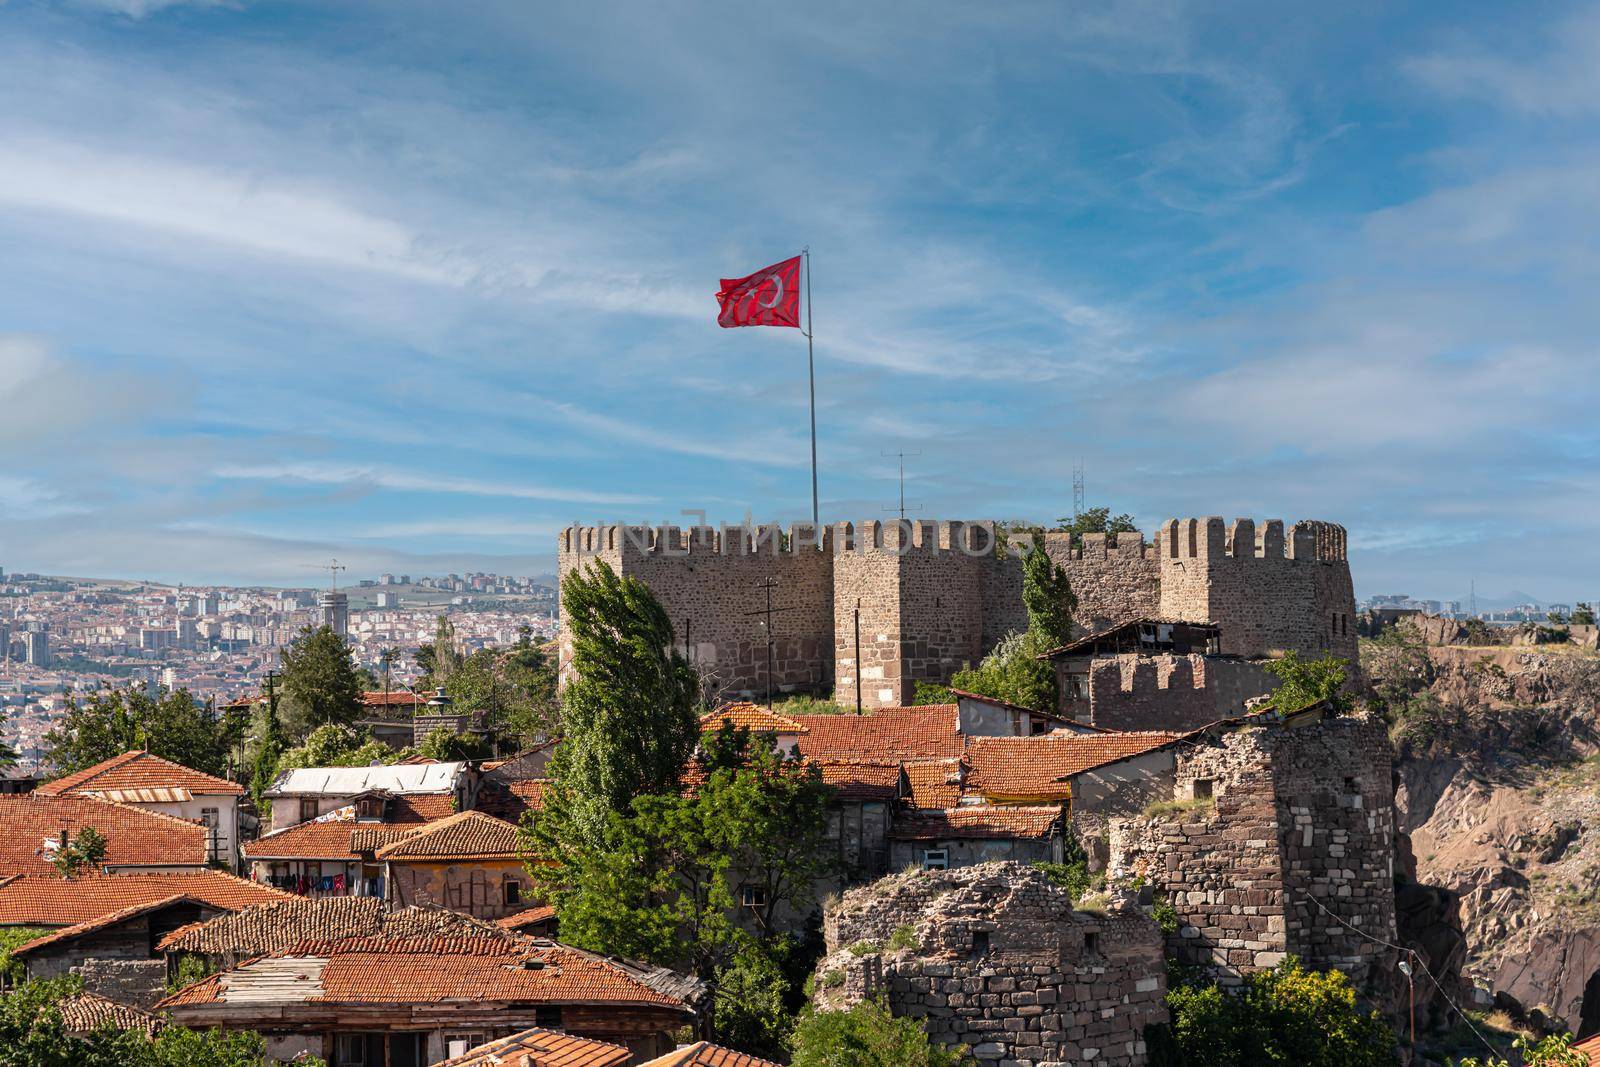 Ankara Castle with the Turkish flag flying over it. Turkish name is Ankara Kalesi by Sonat